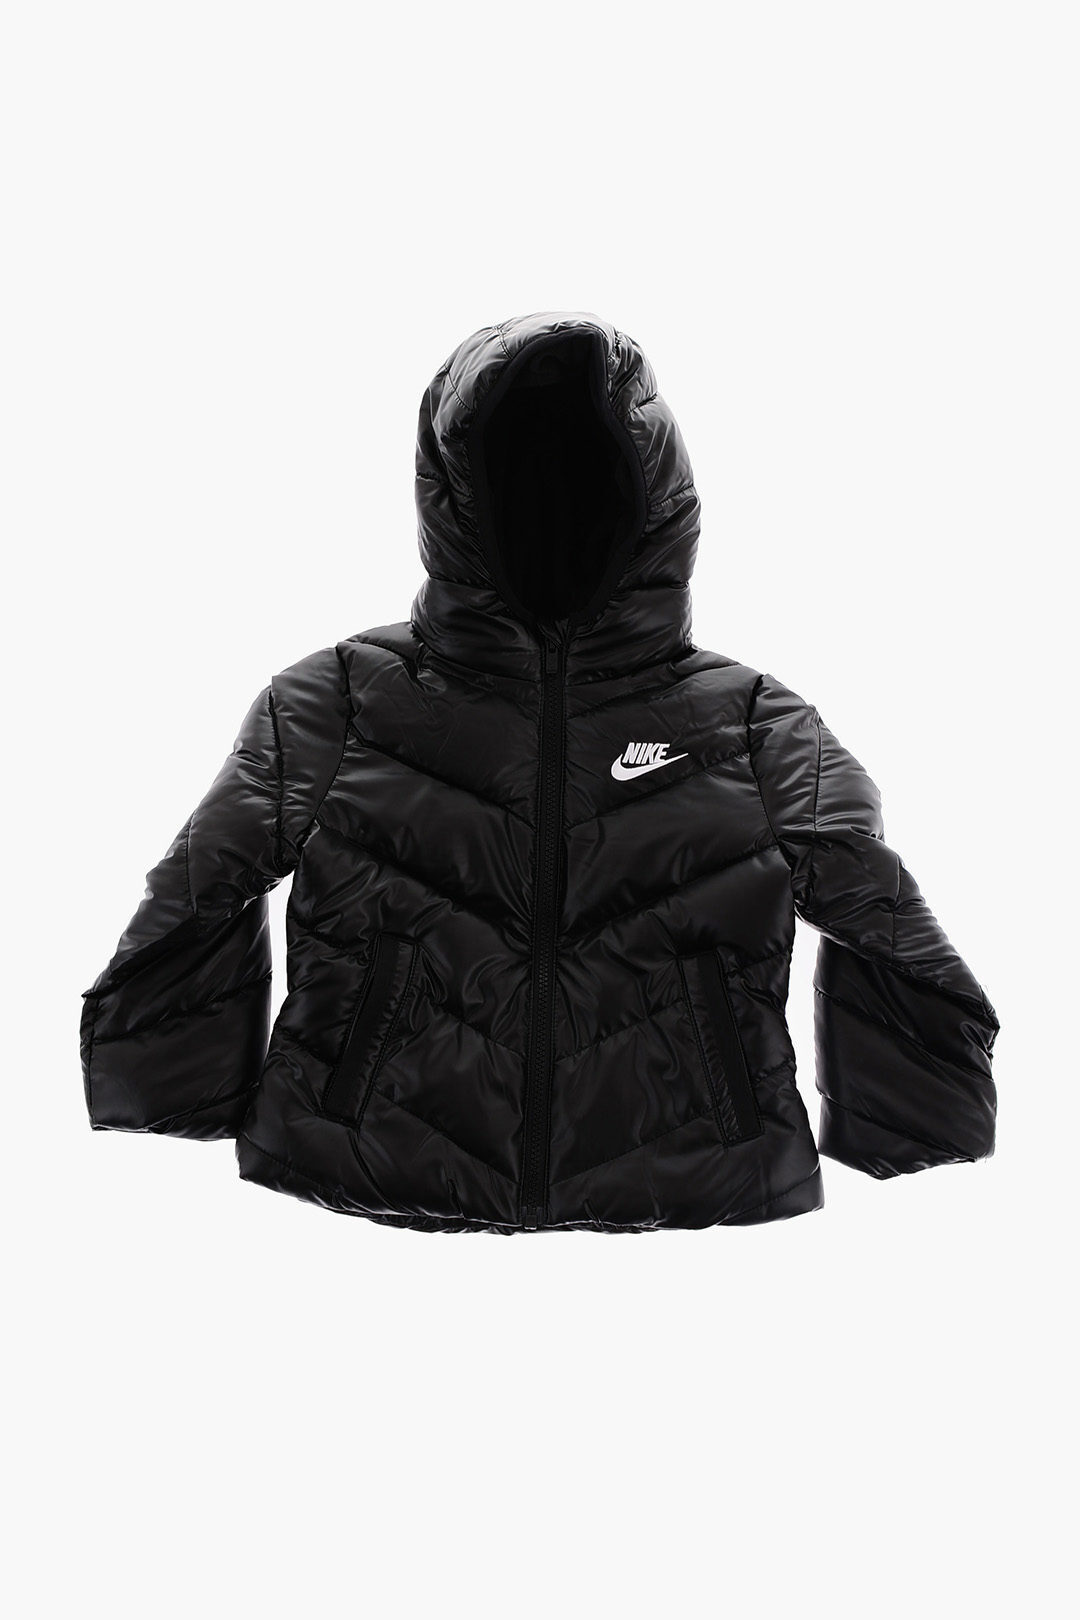 NIKE KIDS ナイキ ジャケット 36J939-023 ガールズ HOODED 2 POCKETS PADDED JACKET WITH EMBROIDERY L..